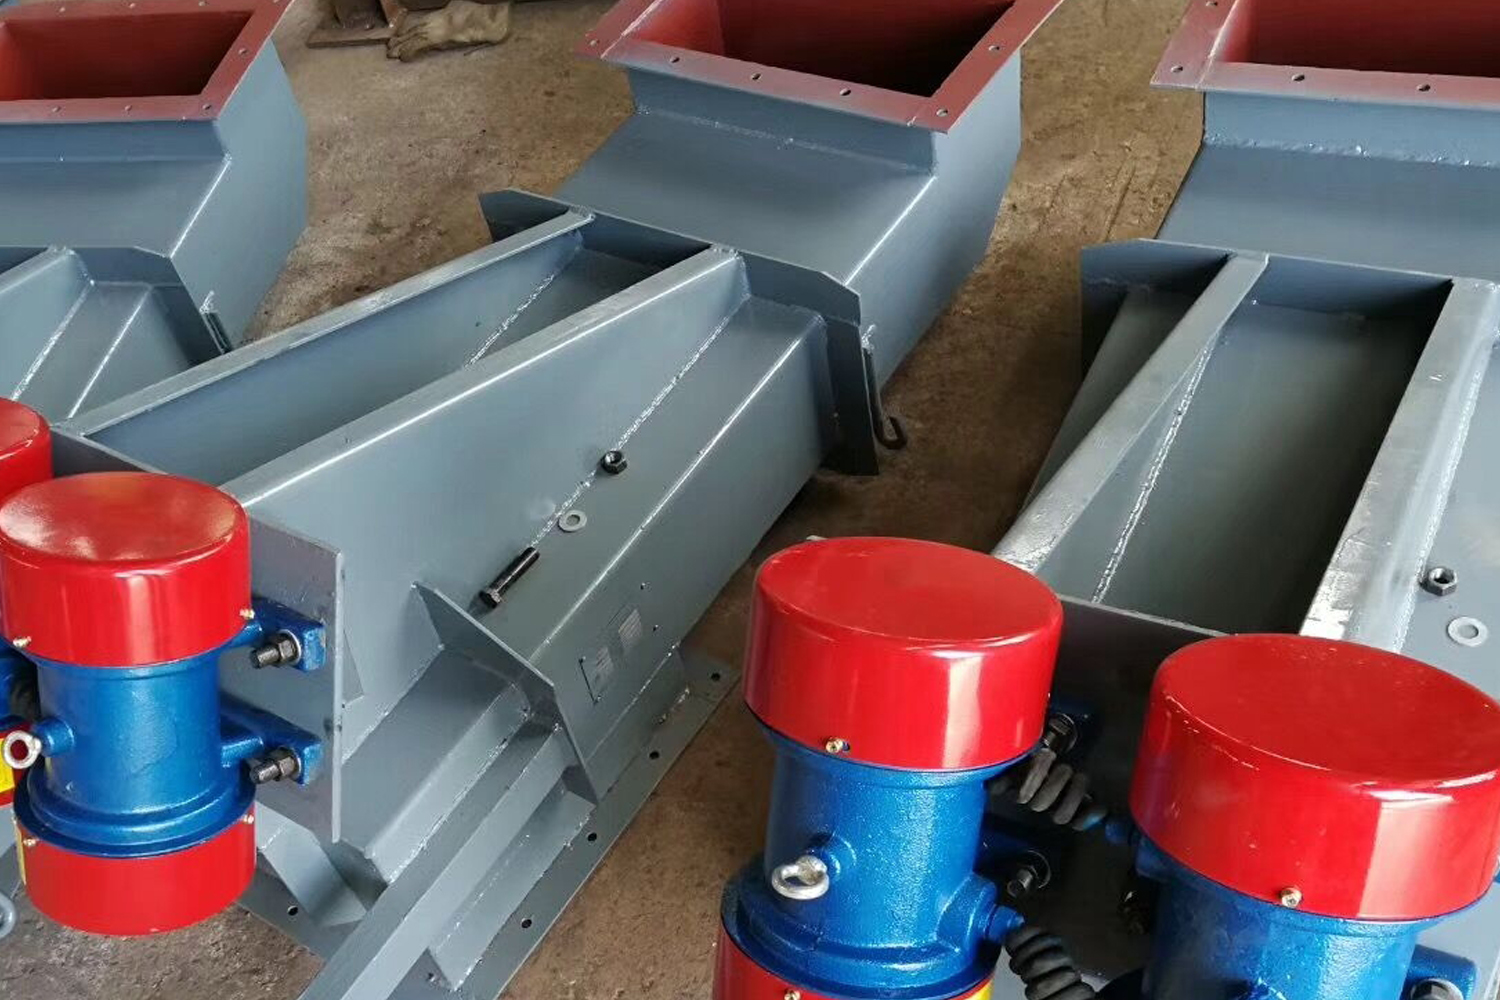 Four major precautions before and after operation of vibrating feeder